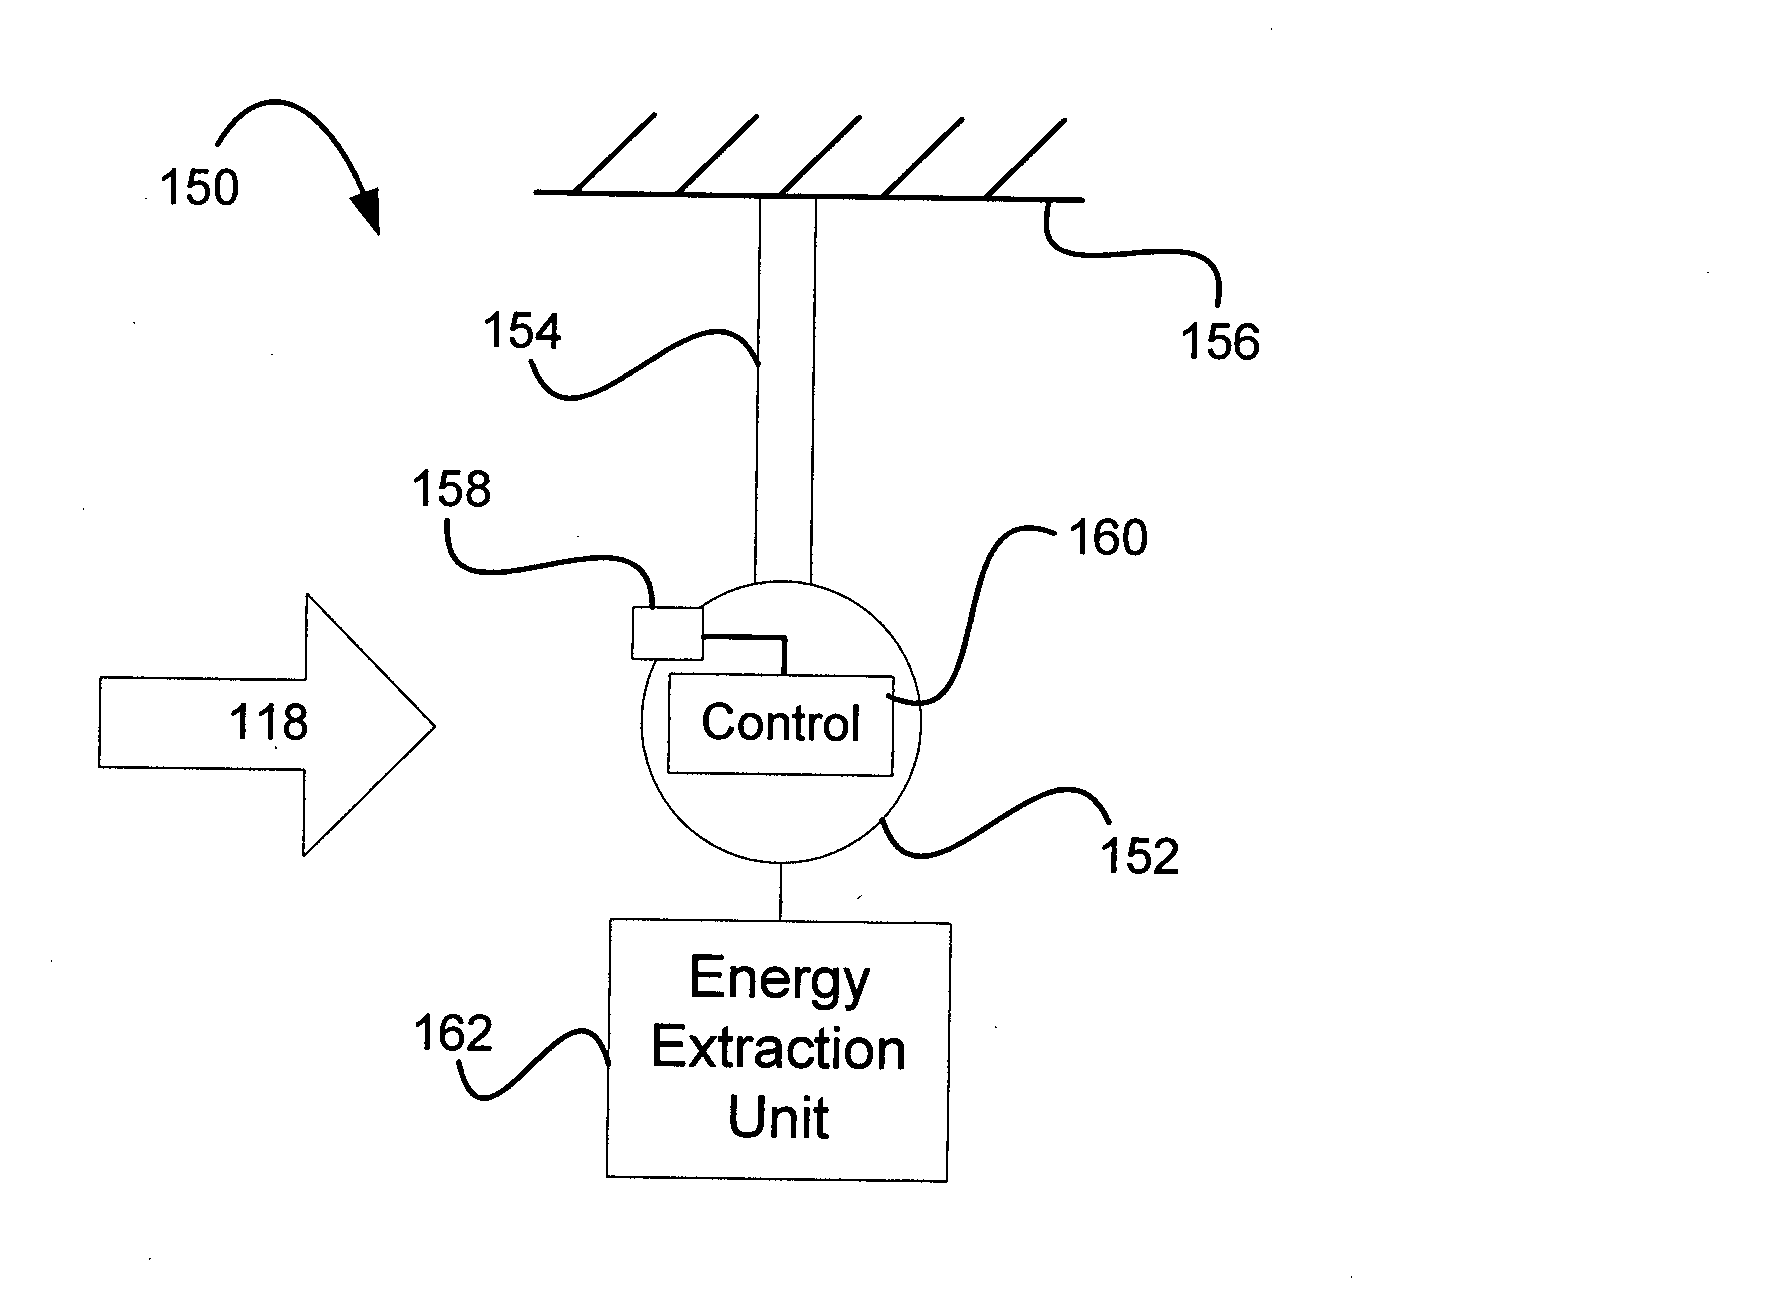 Energy conversion from fluid flow